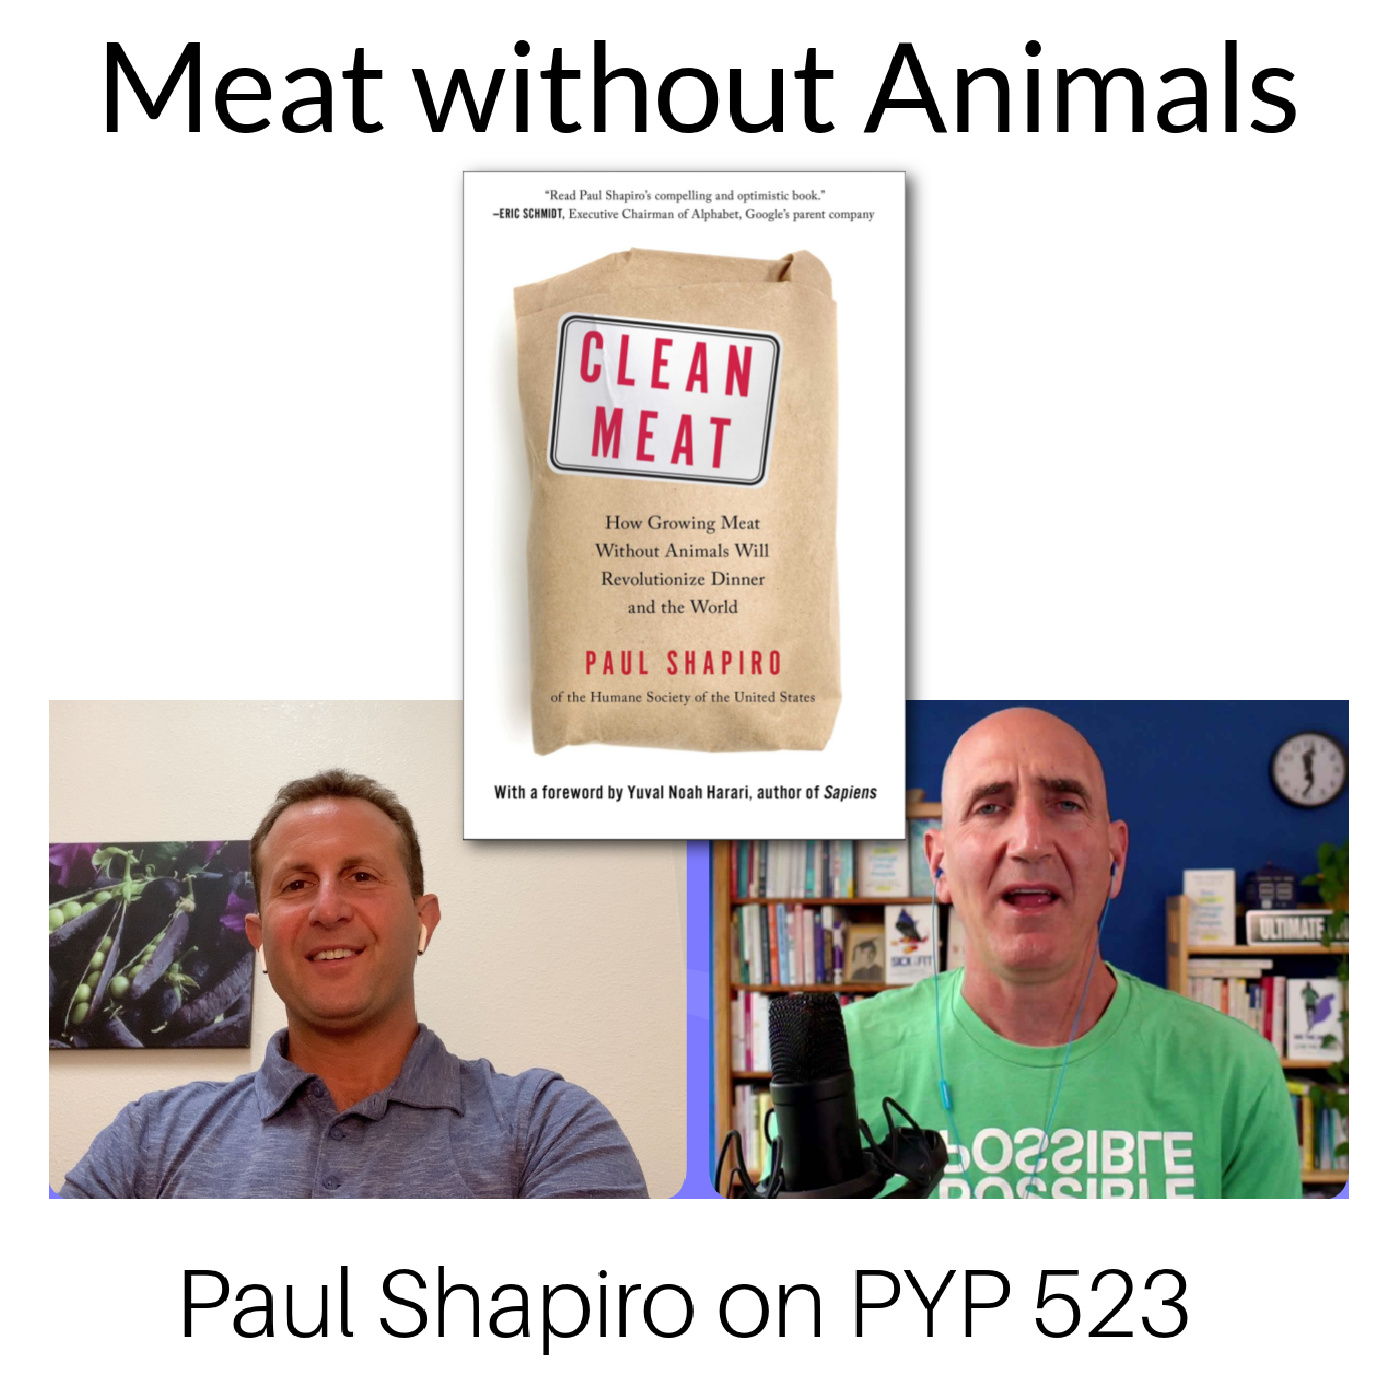 Meat without Animals: Paul Shapiro on PYP 523